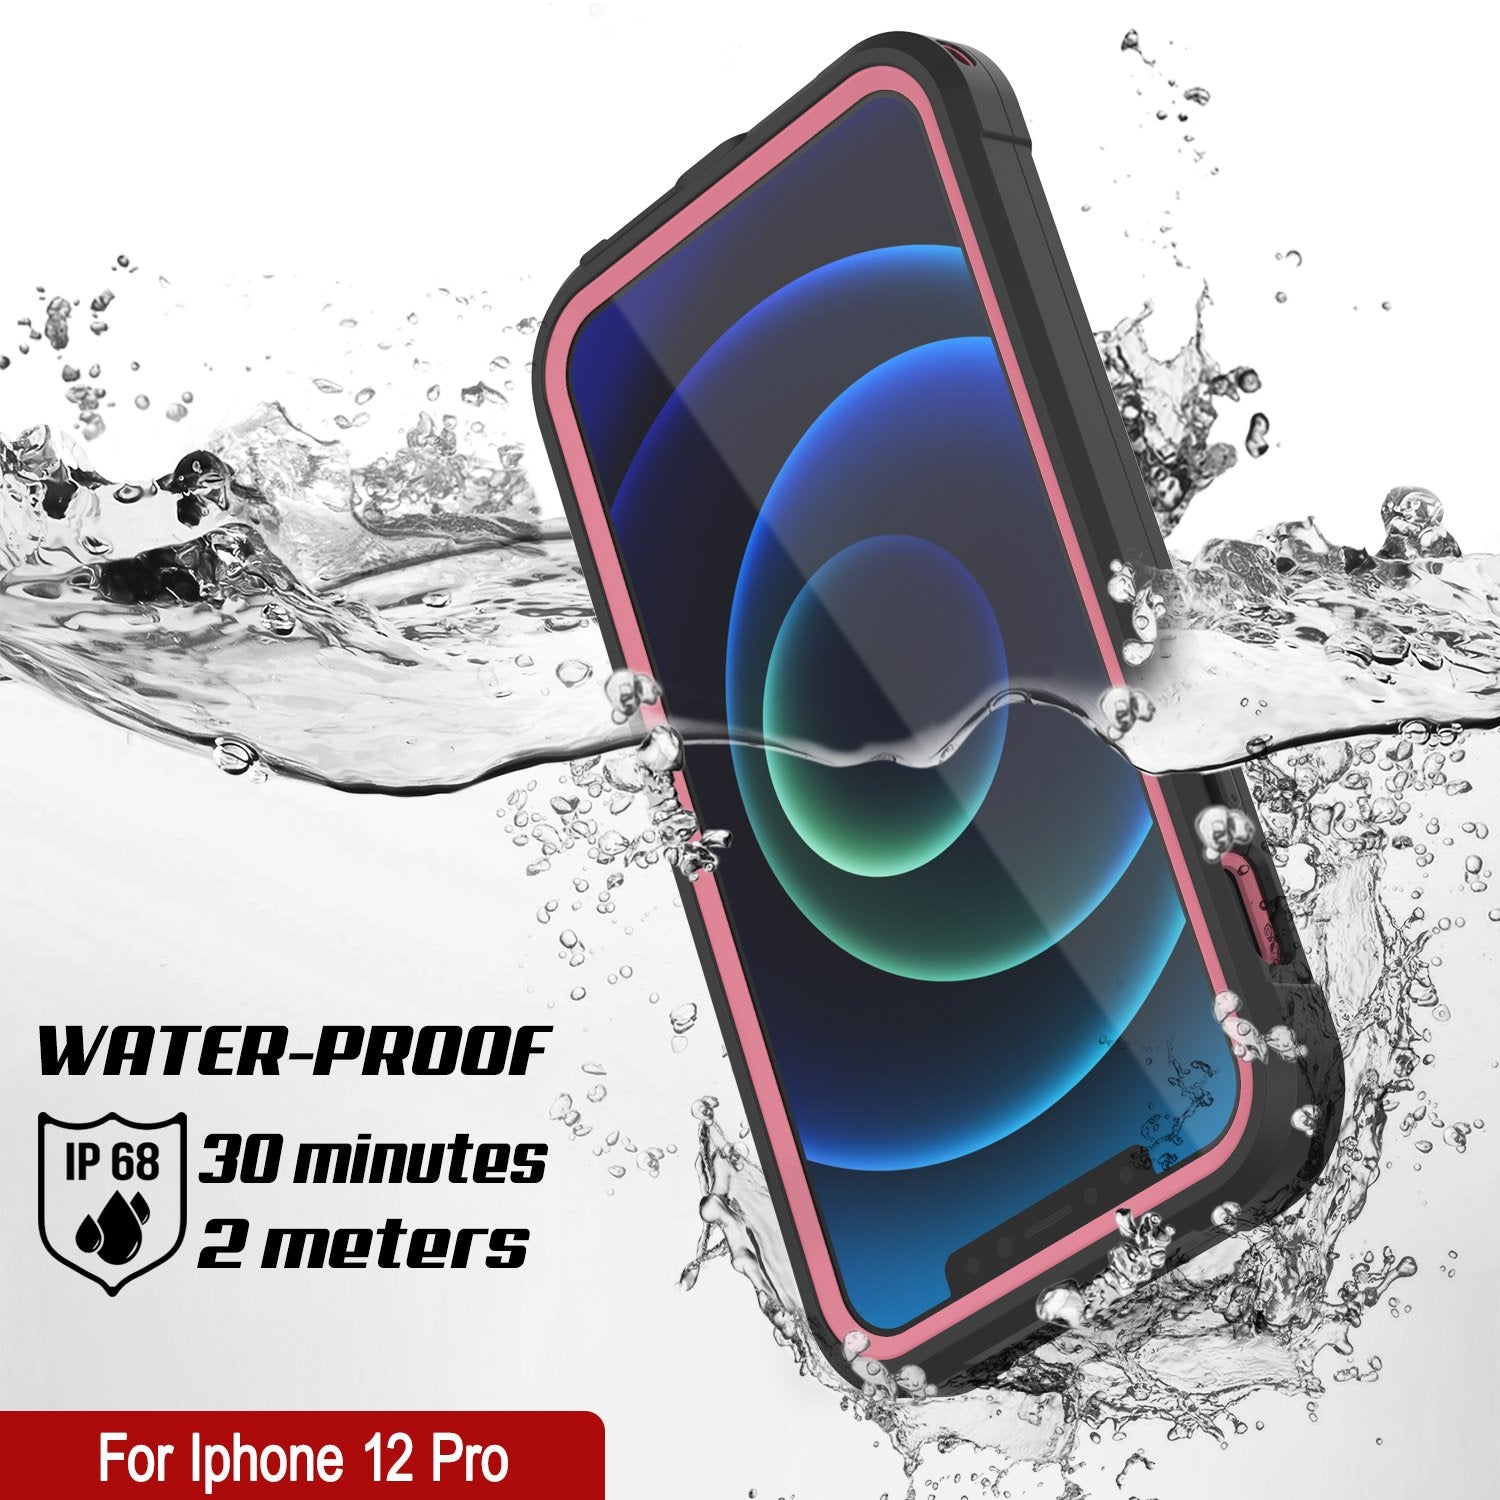 iPhone 12 Pro Waterproof IP68 Case, Punkcase [pink]  [Maximus Series] [Slim Fit] [IP68 Certified] [Shockresistant] Clear Armor Cover with Screen Protector | Ultimate Protection